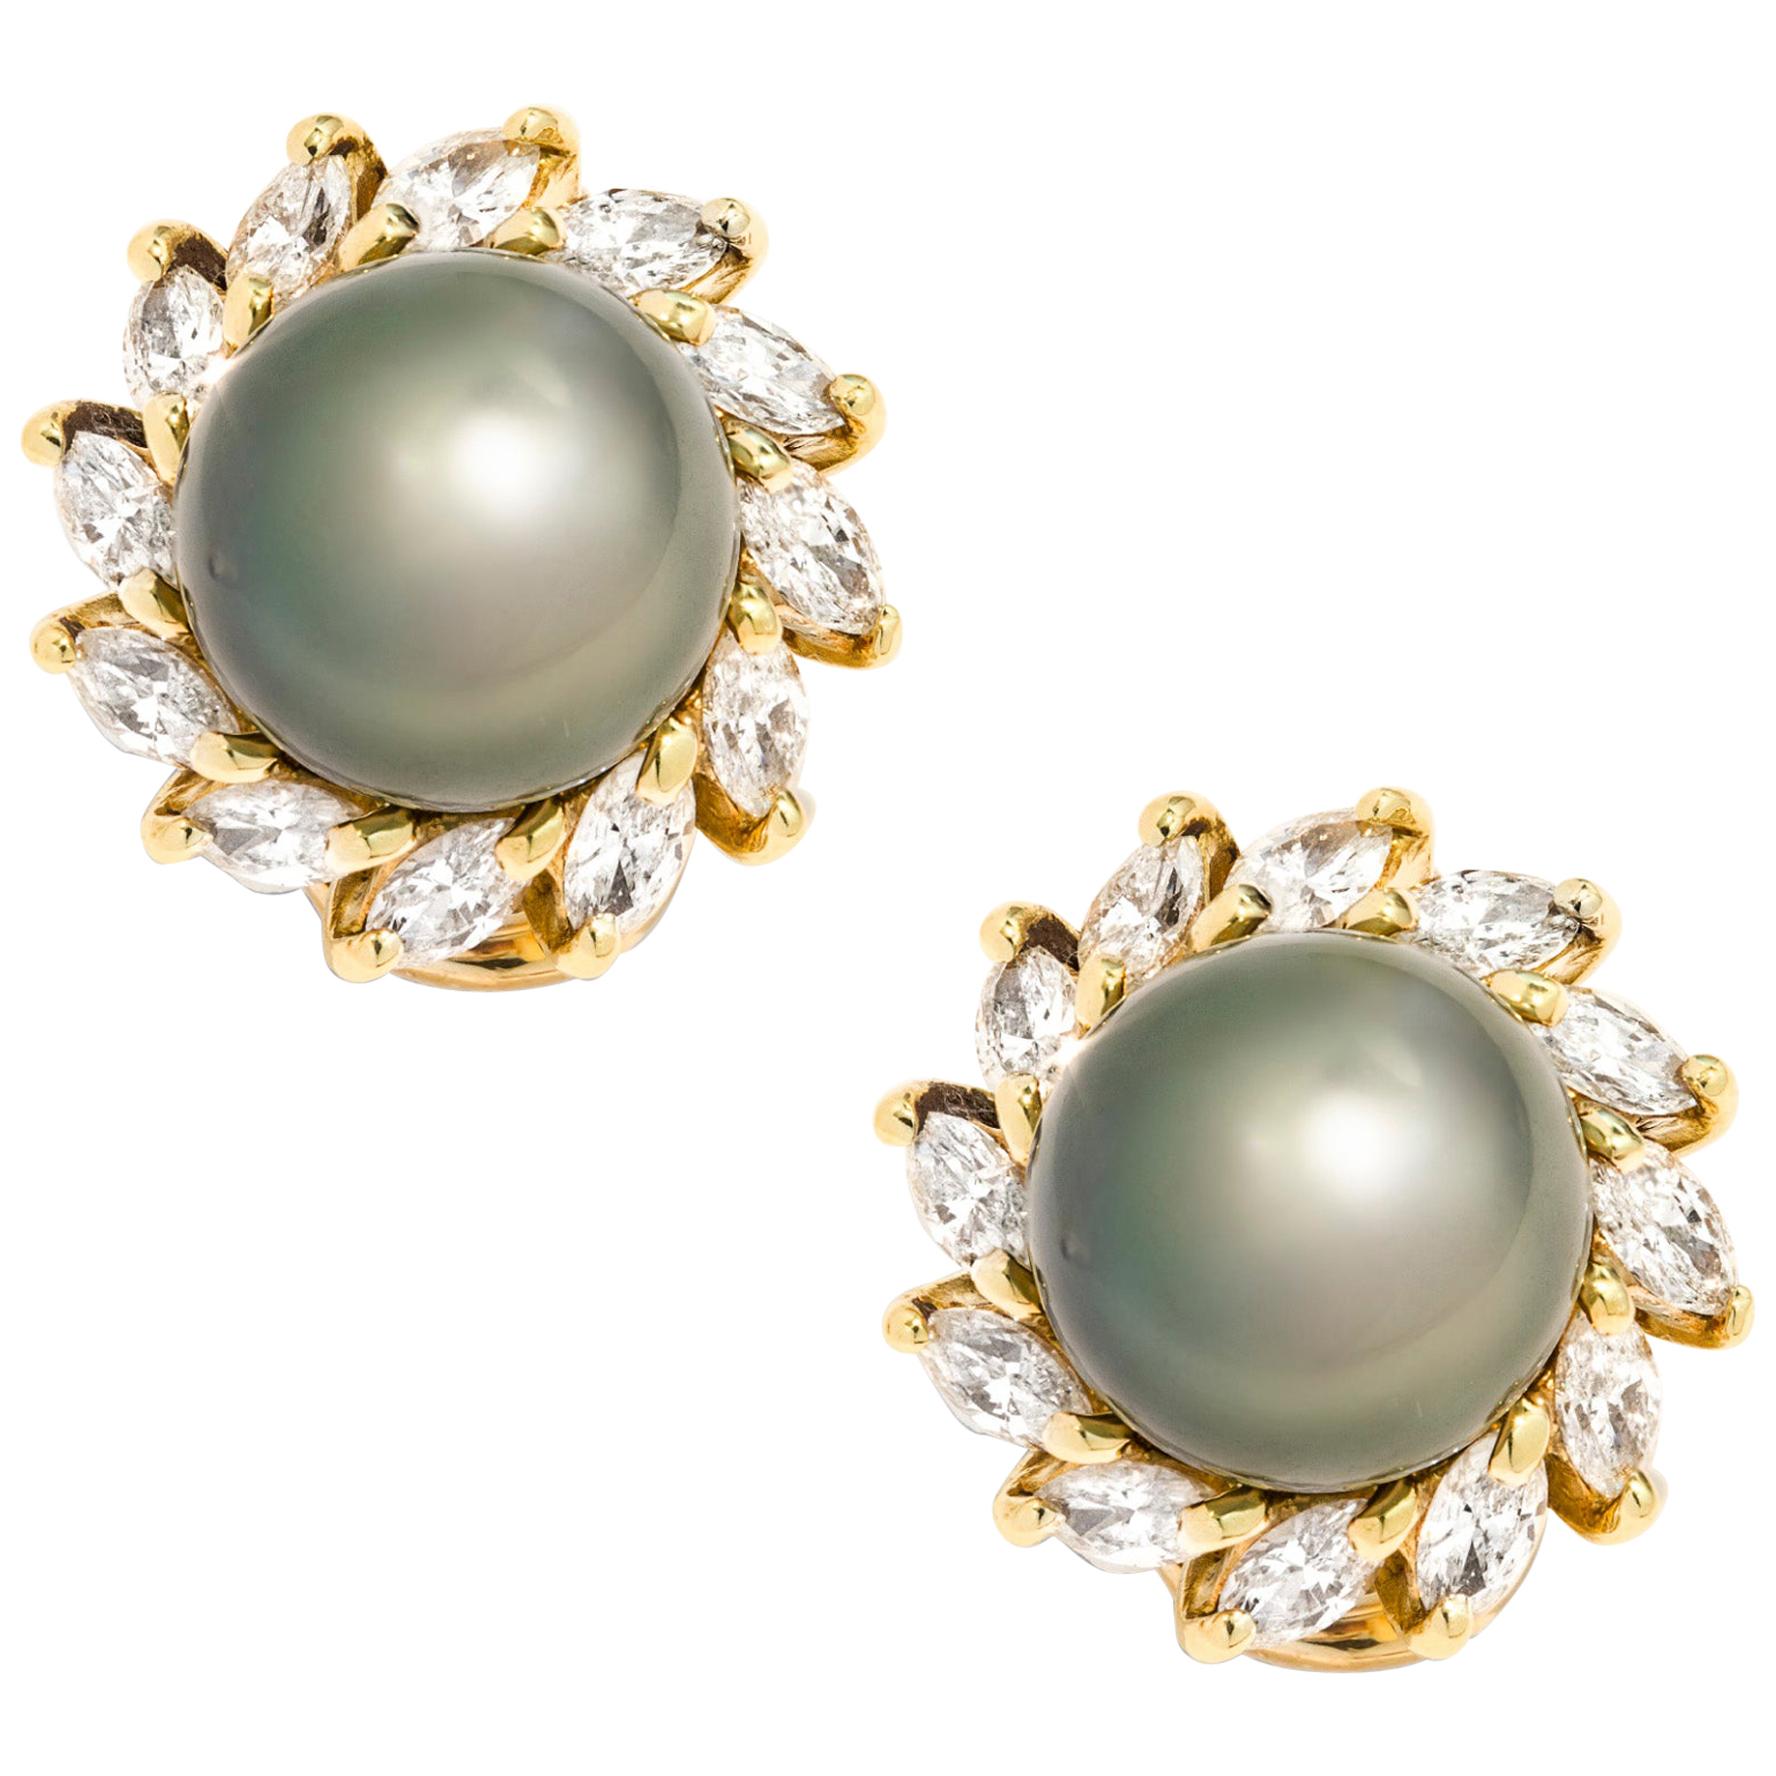 A Pair Of Tahitian Cultured Pearl And Diamond Earrings